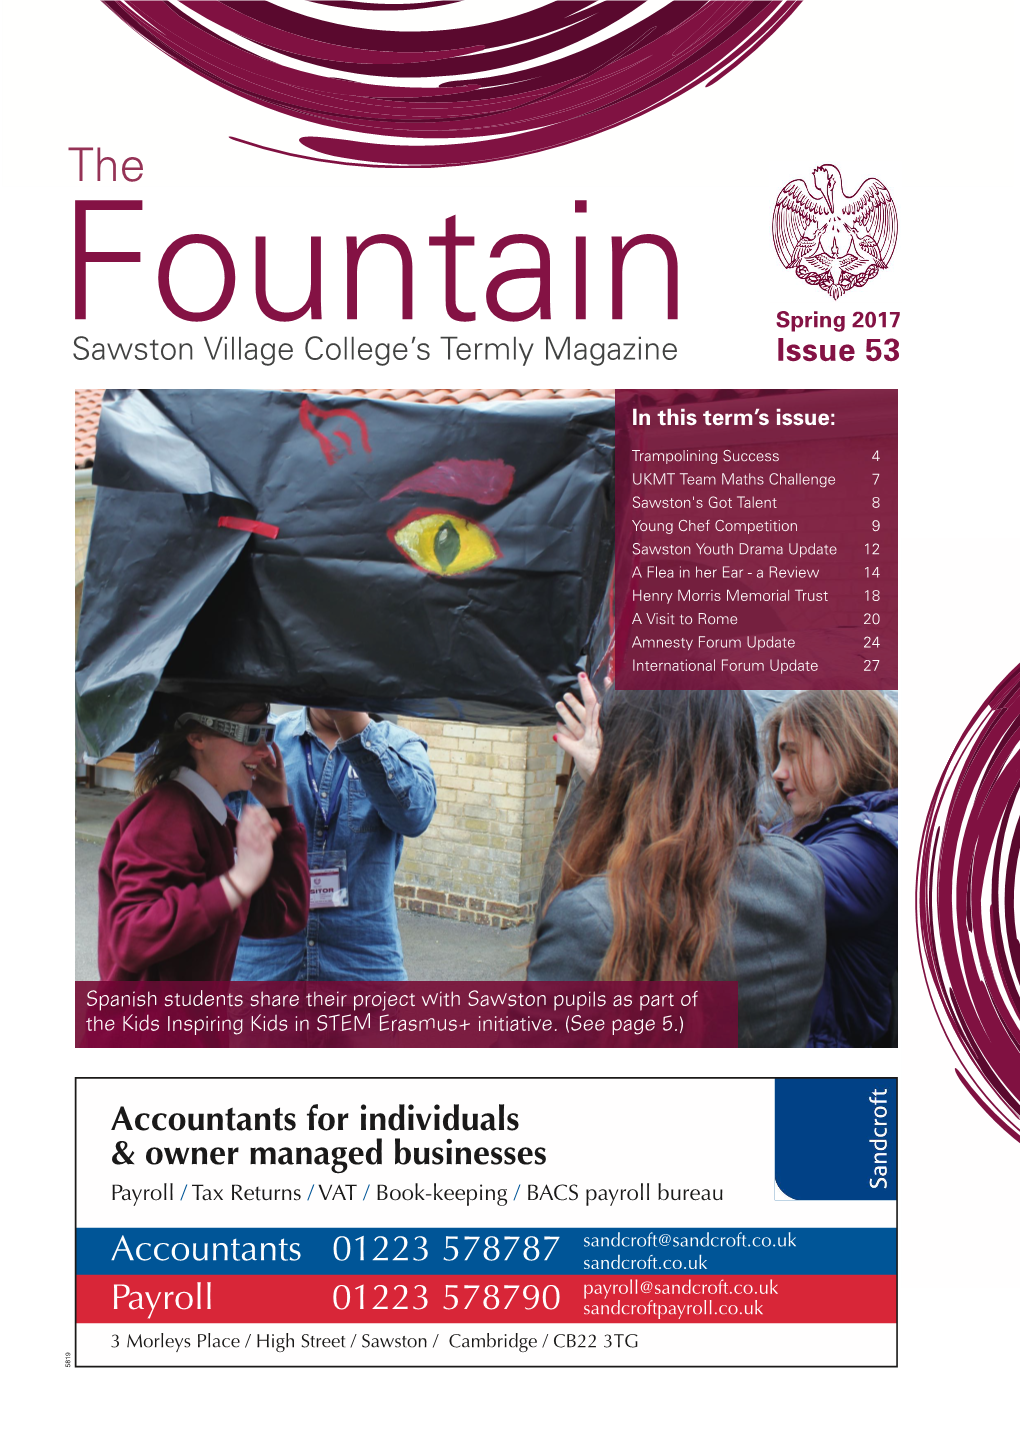 Fountain Spring 2017 8 Layout 1 04/05/2017 14:41 Page 1